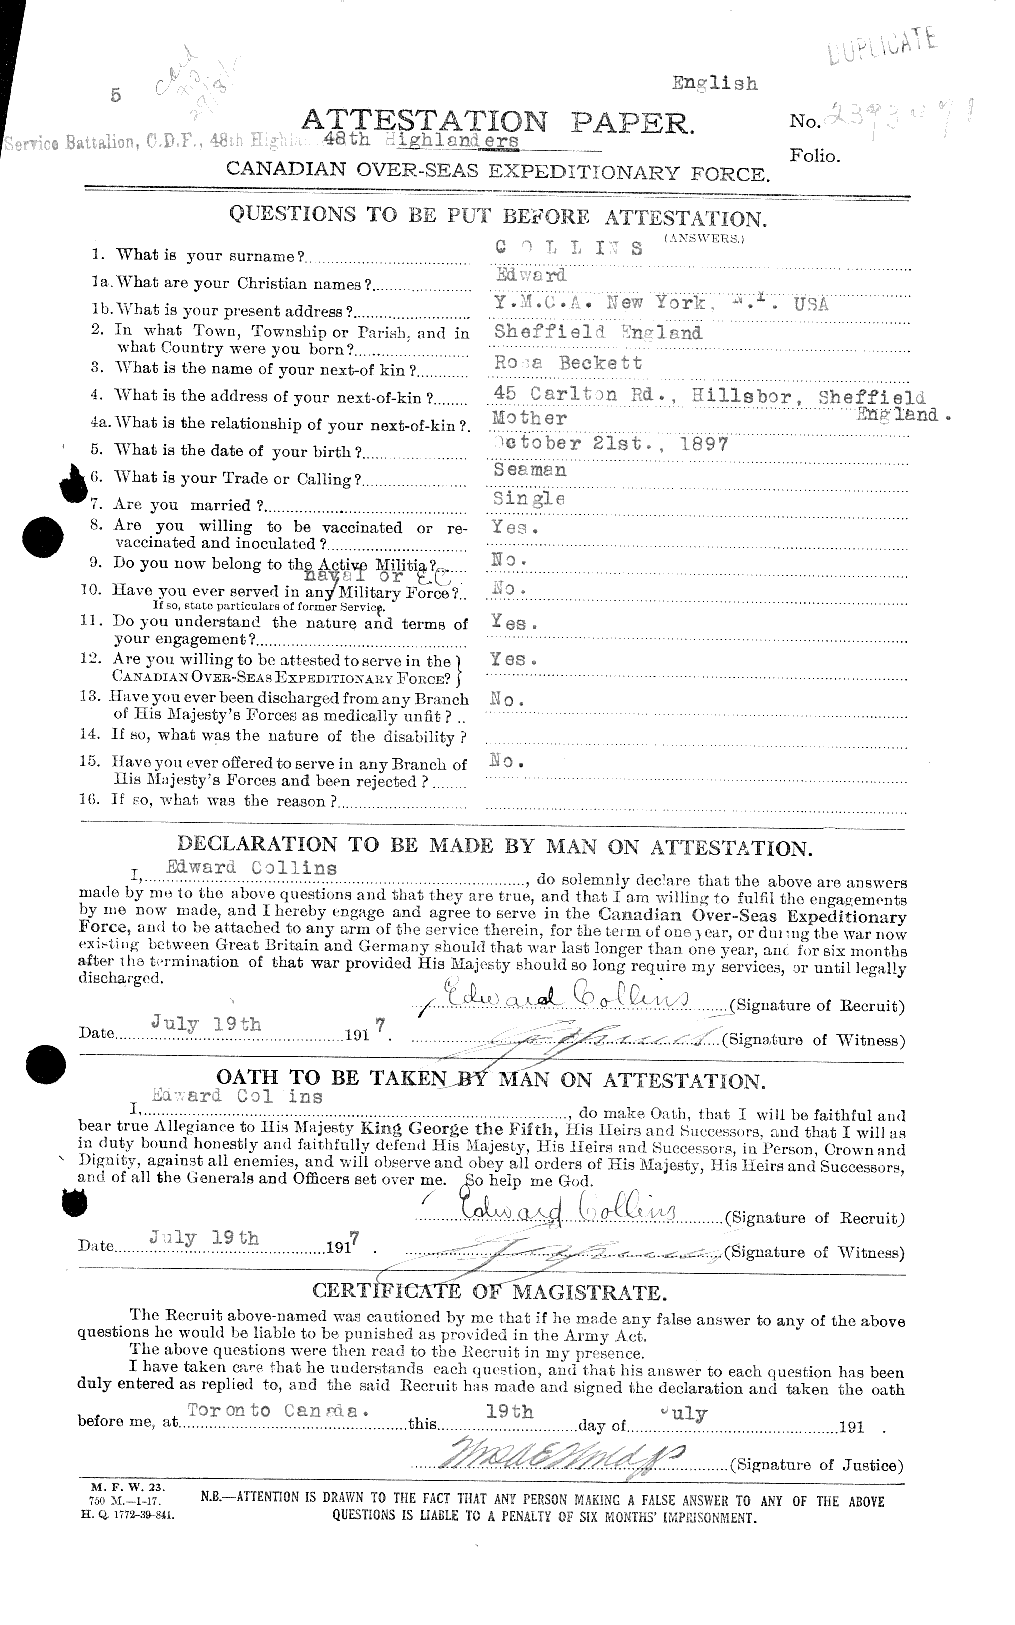 Personnel Records of the First World War - CEF 037744a